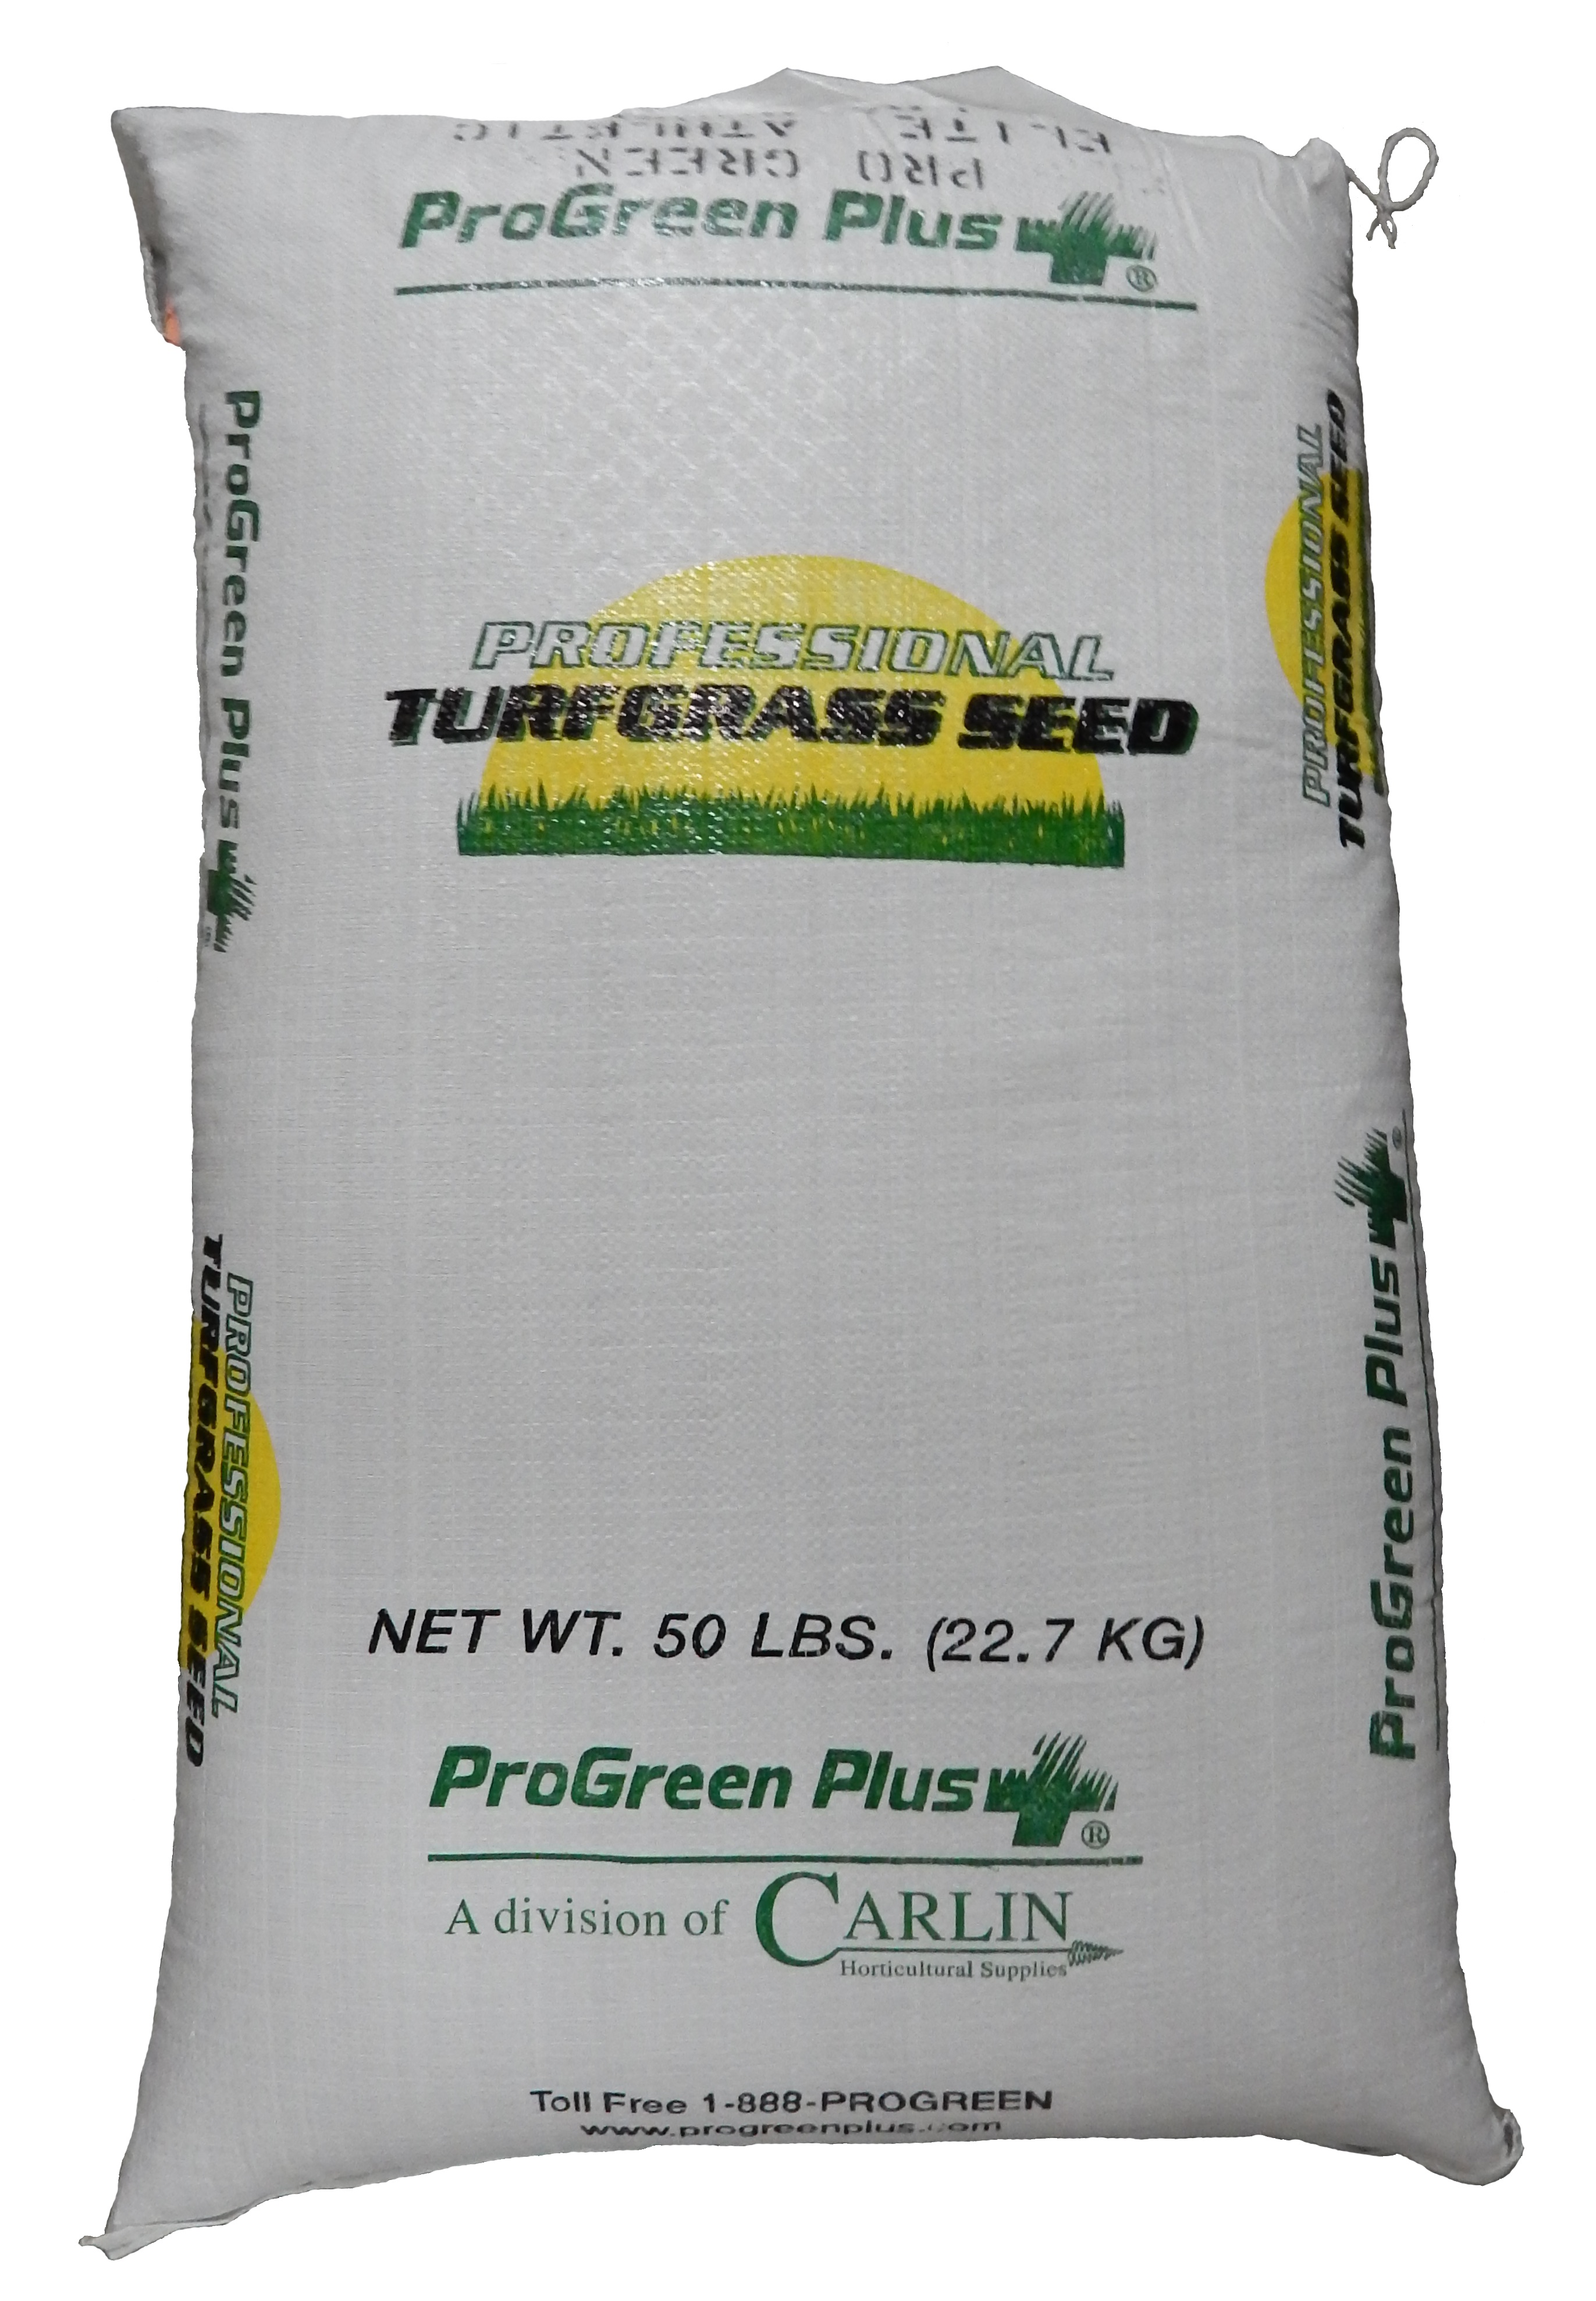 ProGreen Plus Coated Shade Seed 50 lb Bag - 40 per pallet - Turfgrass Seed